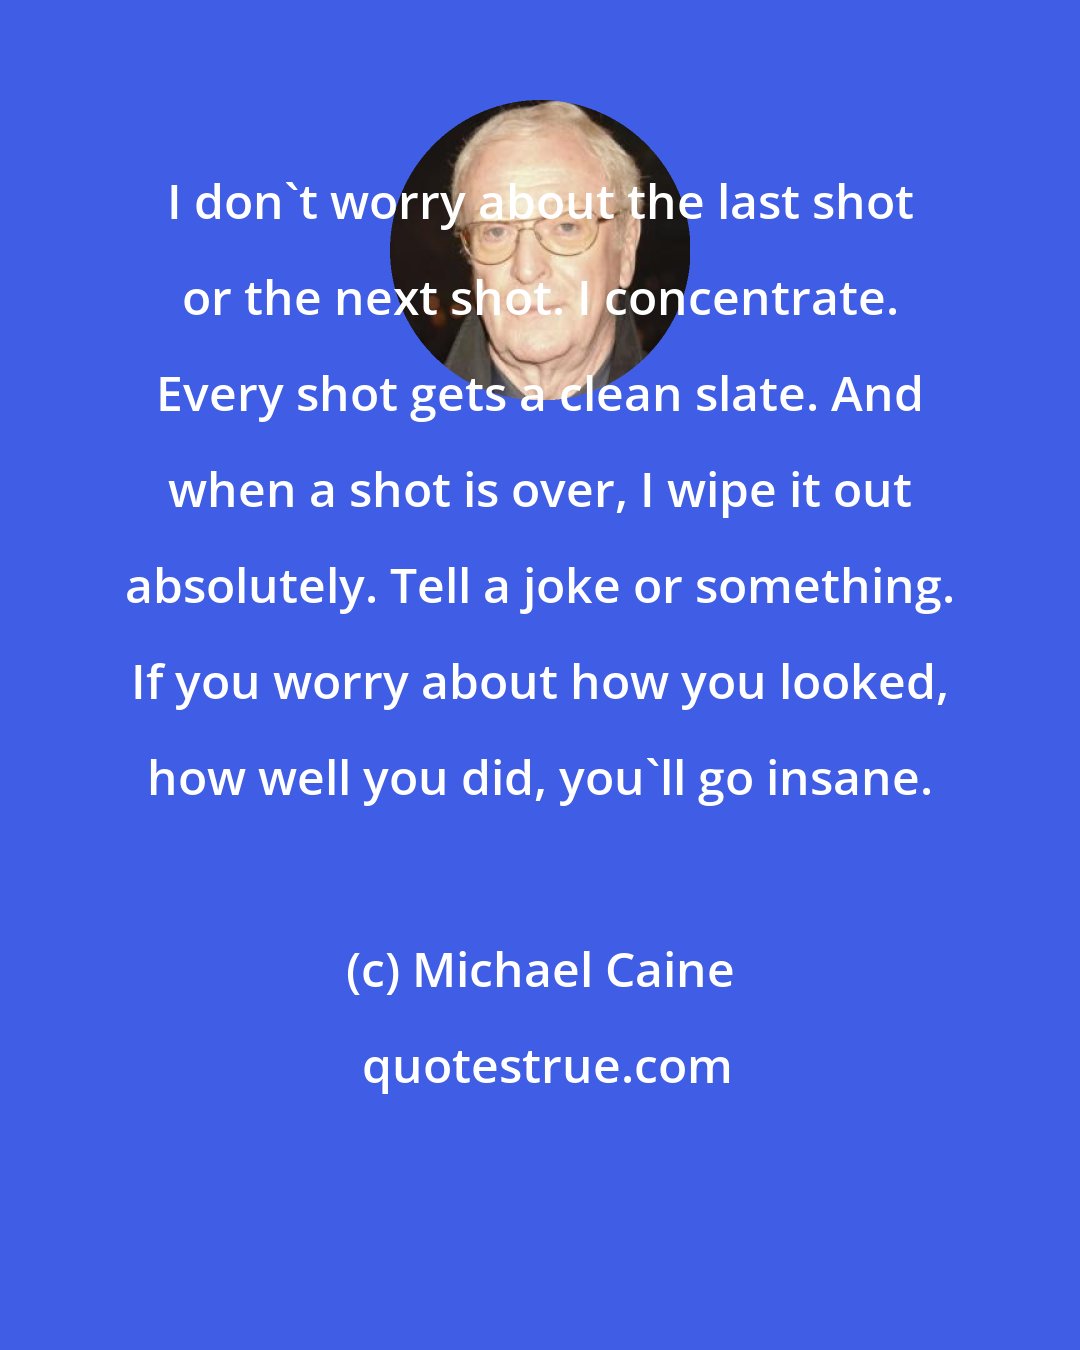 Michael Caine: I don't worry about the last shot or the next shot. I concentrate. Every shot gets a clean slate. And when a shot is over, I wipe it out absolutely. Tell a joke or something. If you worry about how you looked, how well you did, you'll go insane.